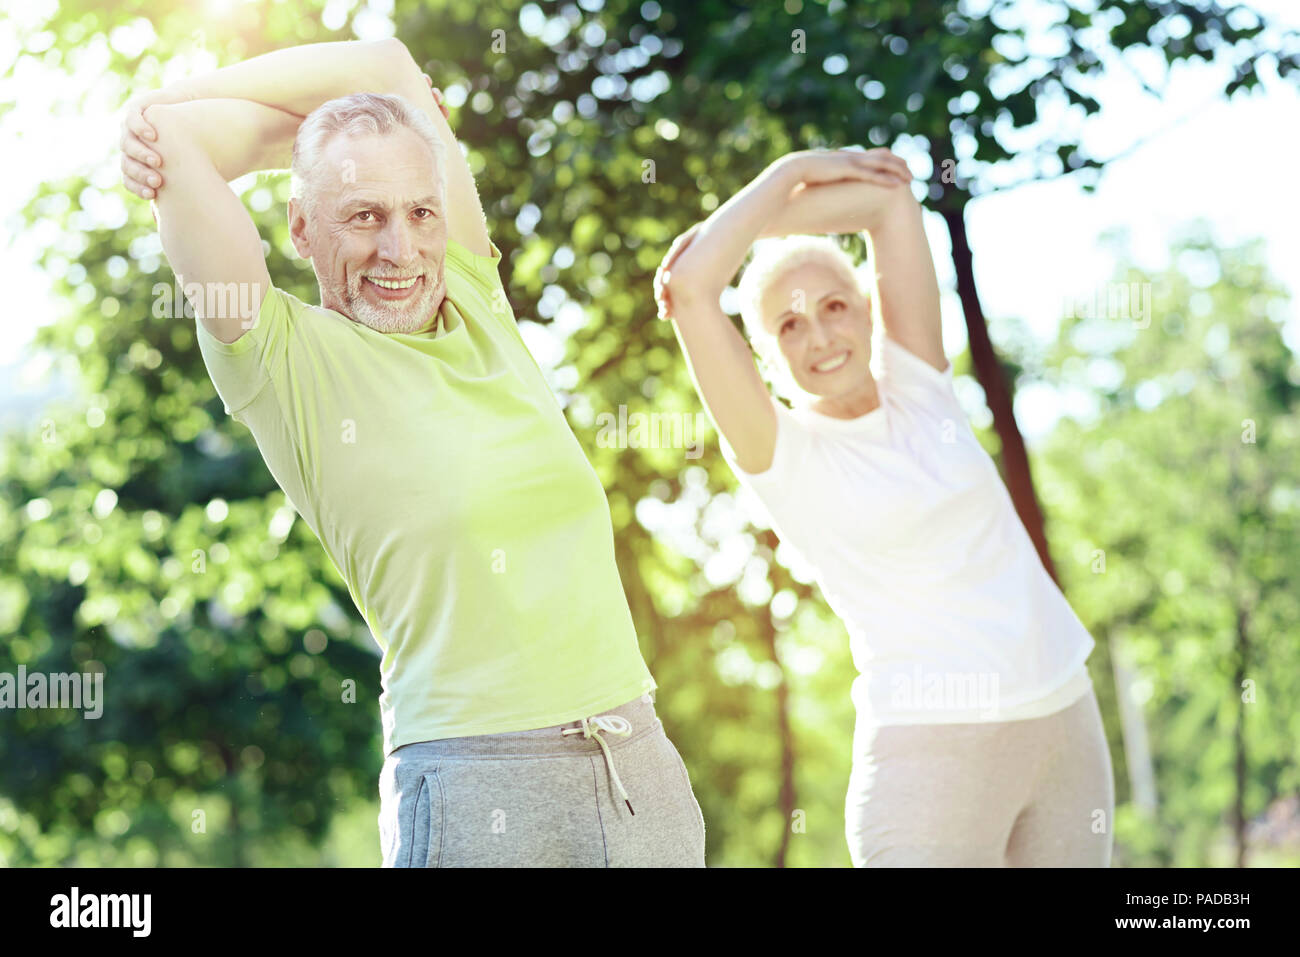 Pleasant aged couple looking happy while training Stock Photo